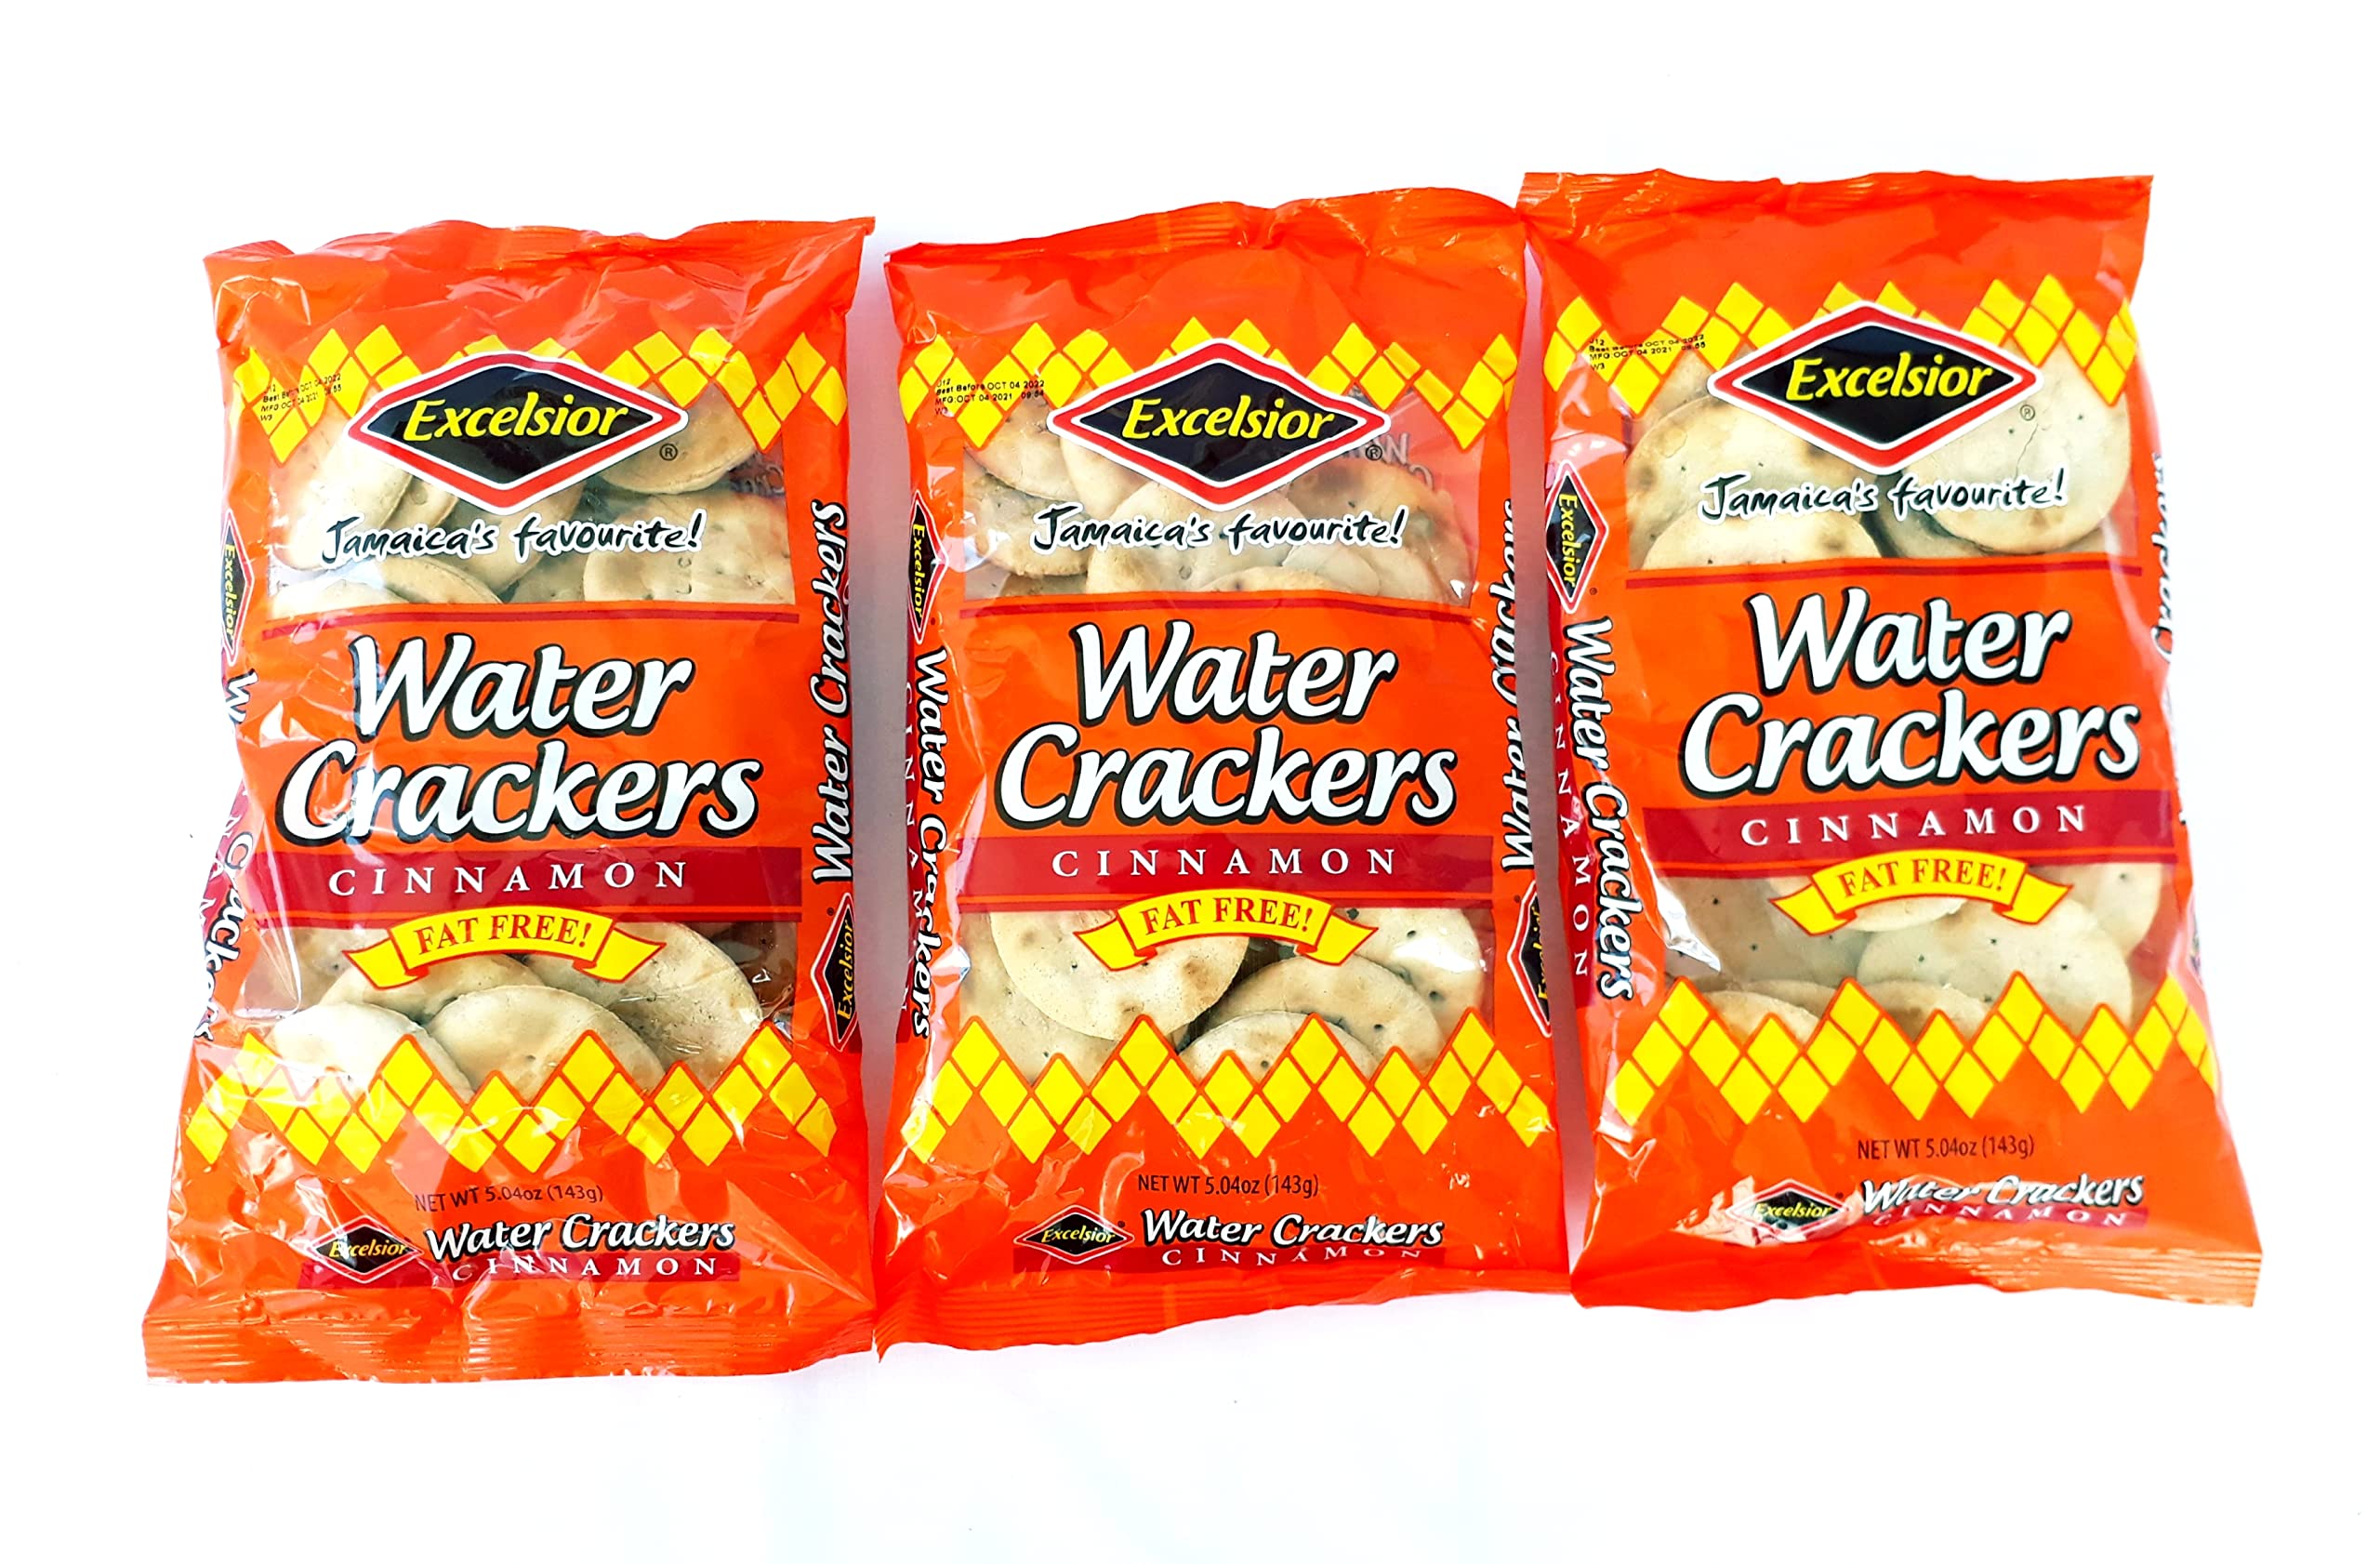 Excelsior Water Crackers FAT FREE Cinnamon 143g/5.04oz x 3 packs Jamaica's Favourite